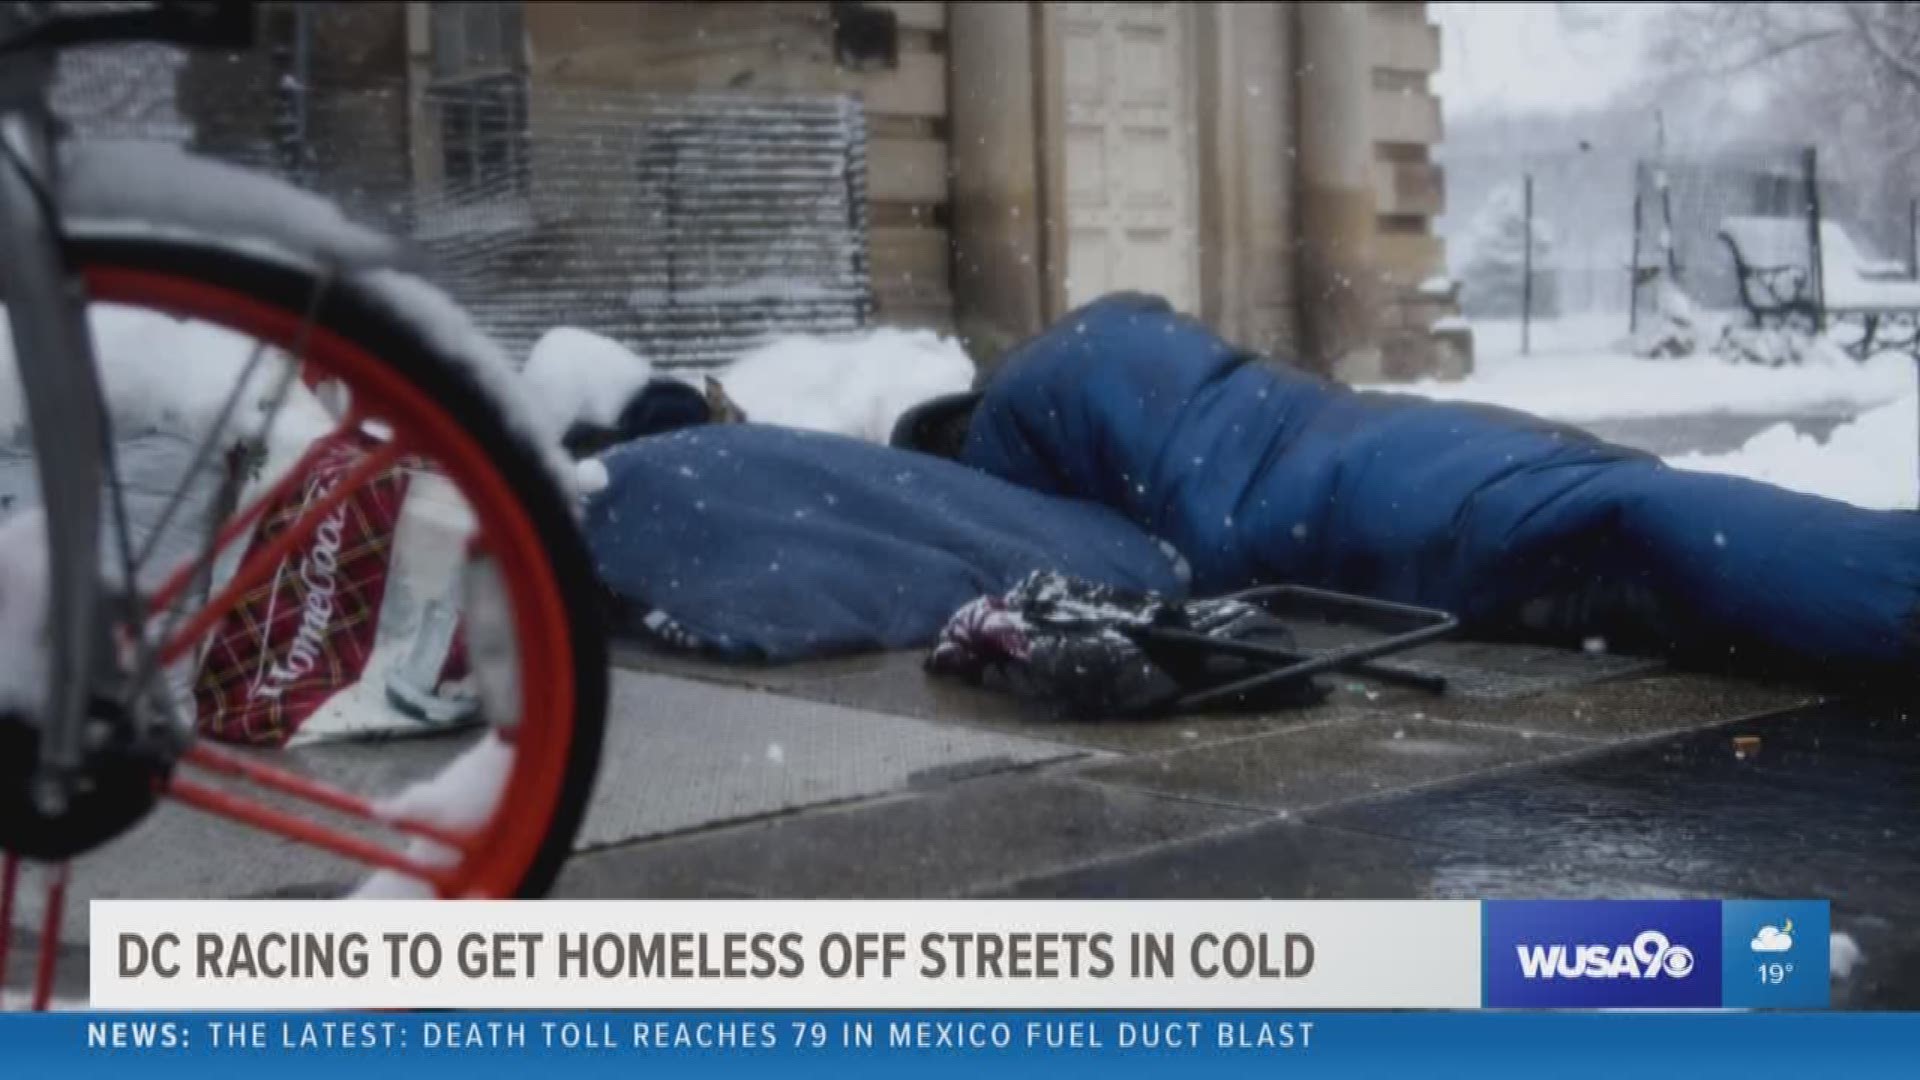 DC DHS members are asking the public to keep an eye-out for anyone homeless or in need of help as temperatures are expected to drop into the low teens Sunday night.